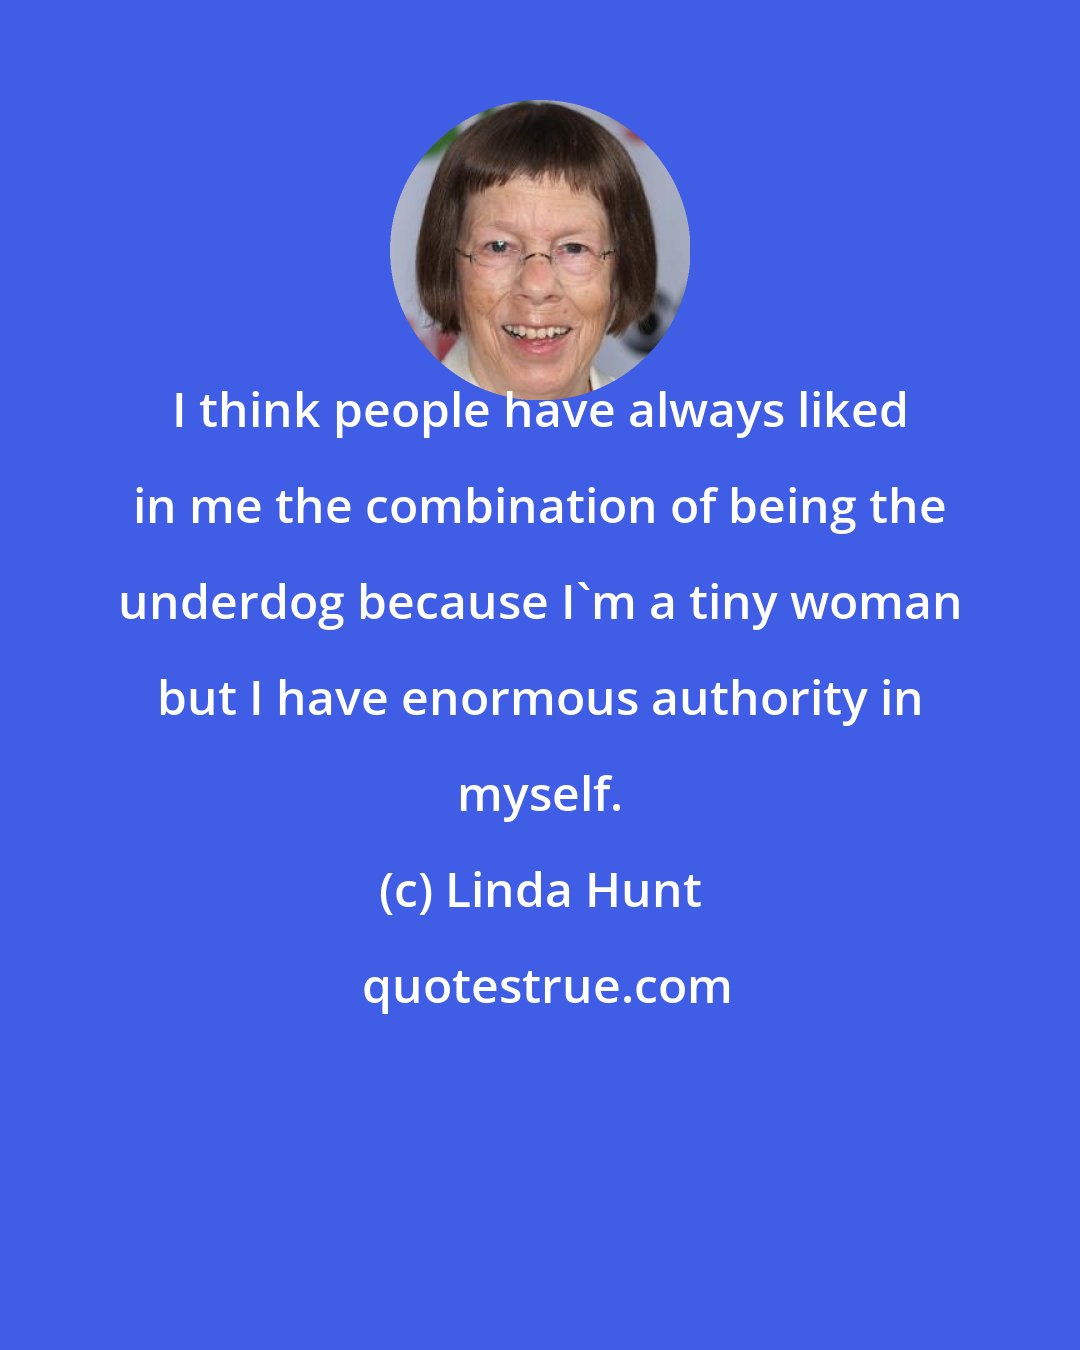 Linda Hunt: I think people have always liked in me the combination of being the underdog because I'm a tiny woman but I have enormous authority in myself.